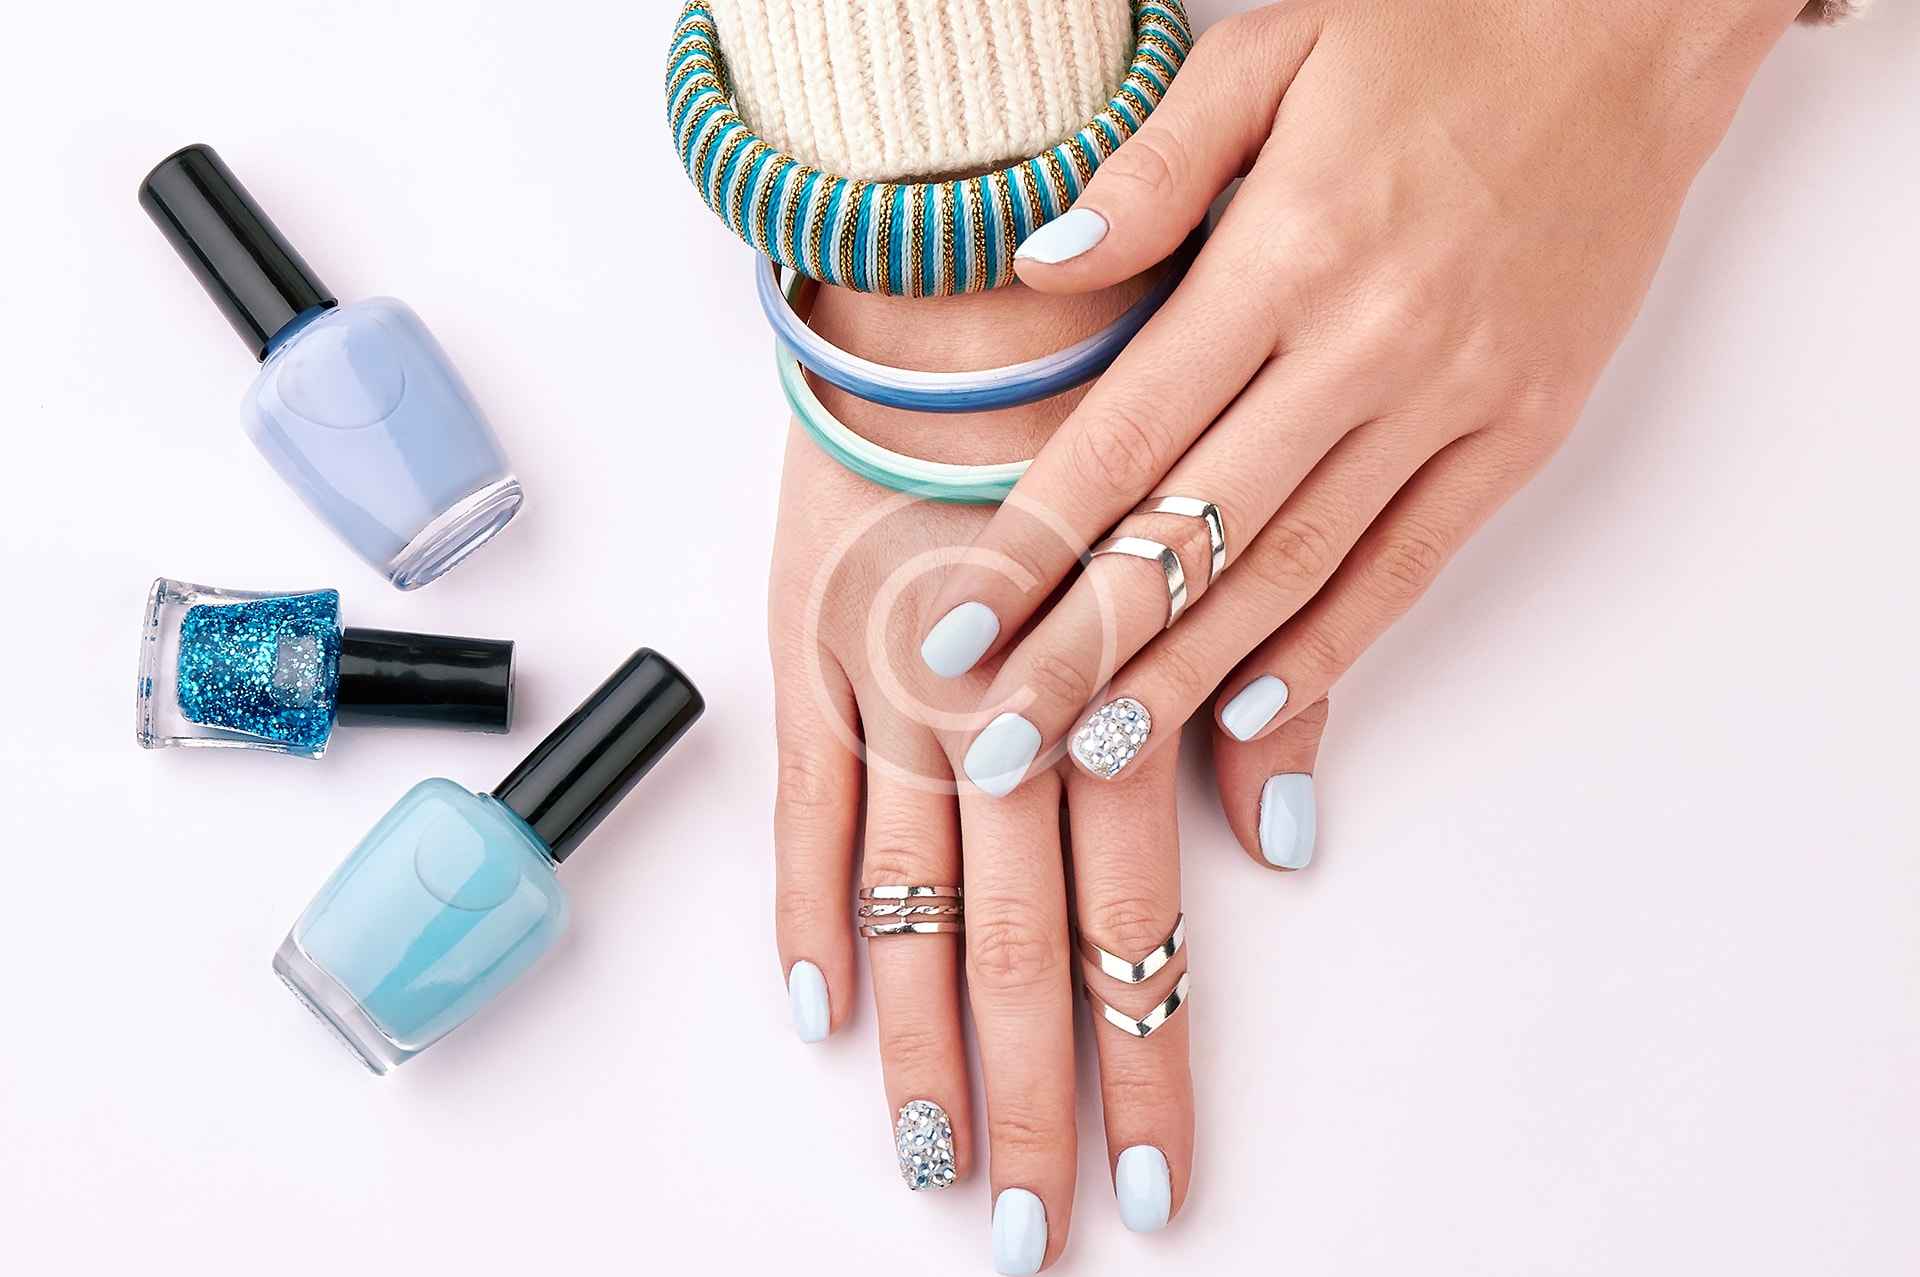 Nail Salons in Abbotsford, BC - Fraser Valley Local